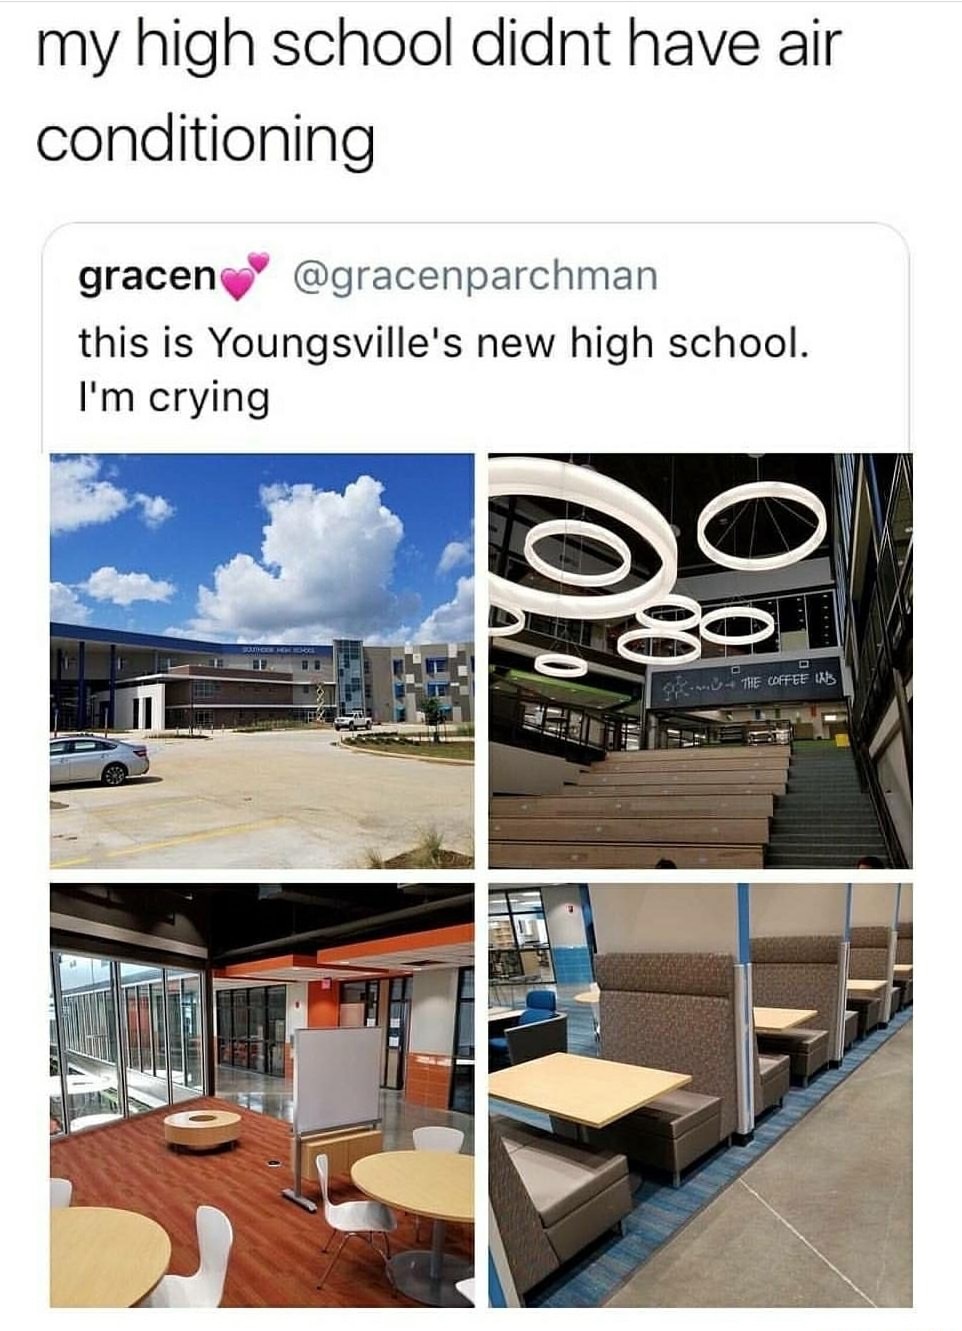 school air conditioning meme - my high school didnt have air conditioning gracen this is Youngsville's new high school. I'm crying The Coffee 13